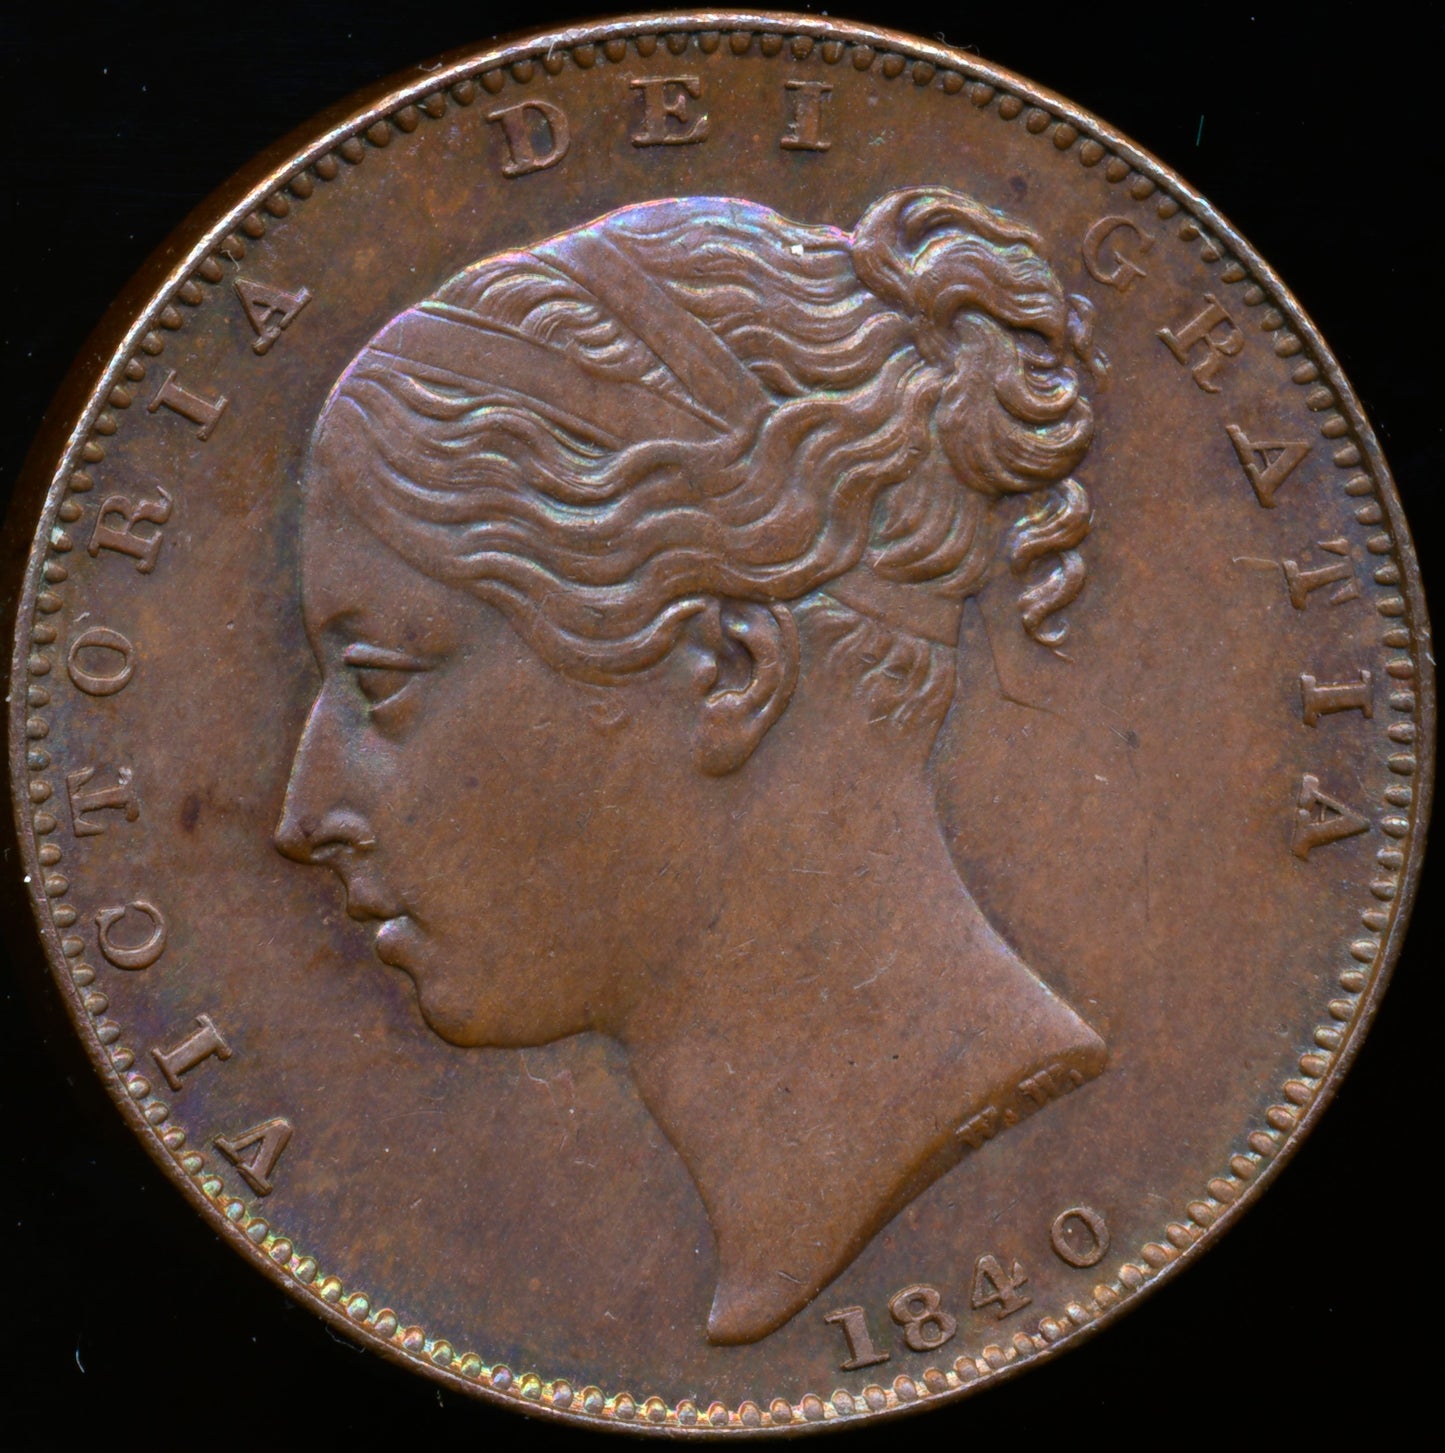 1840 Farthing S3950 BMC 1559 Colon after DEF Wide date  EF